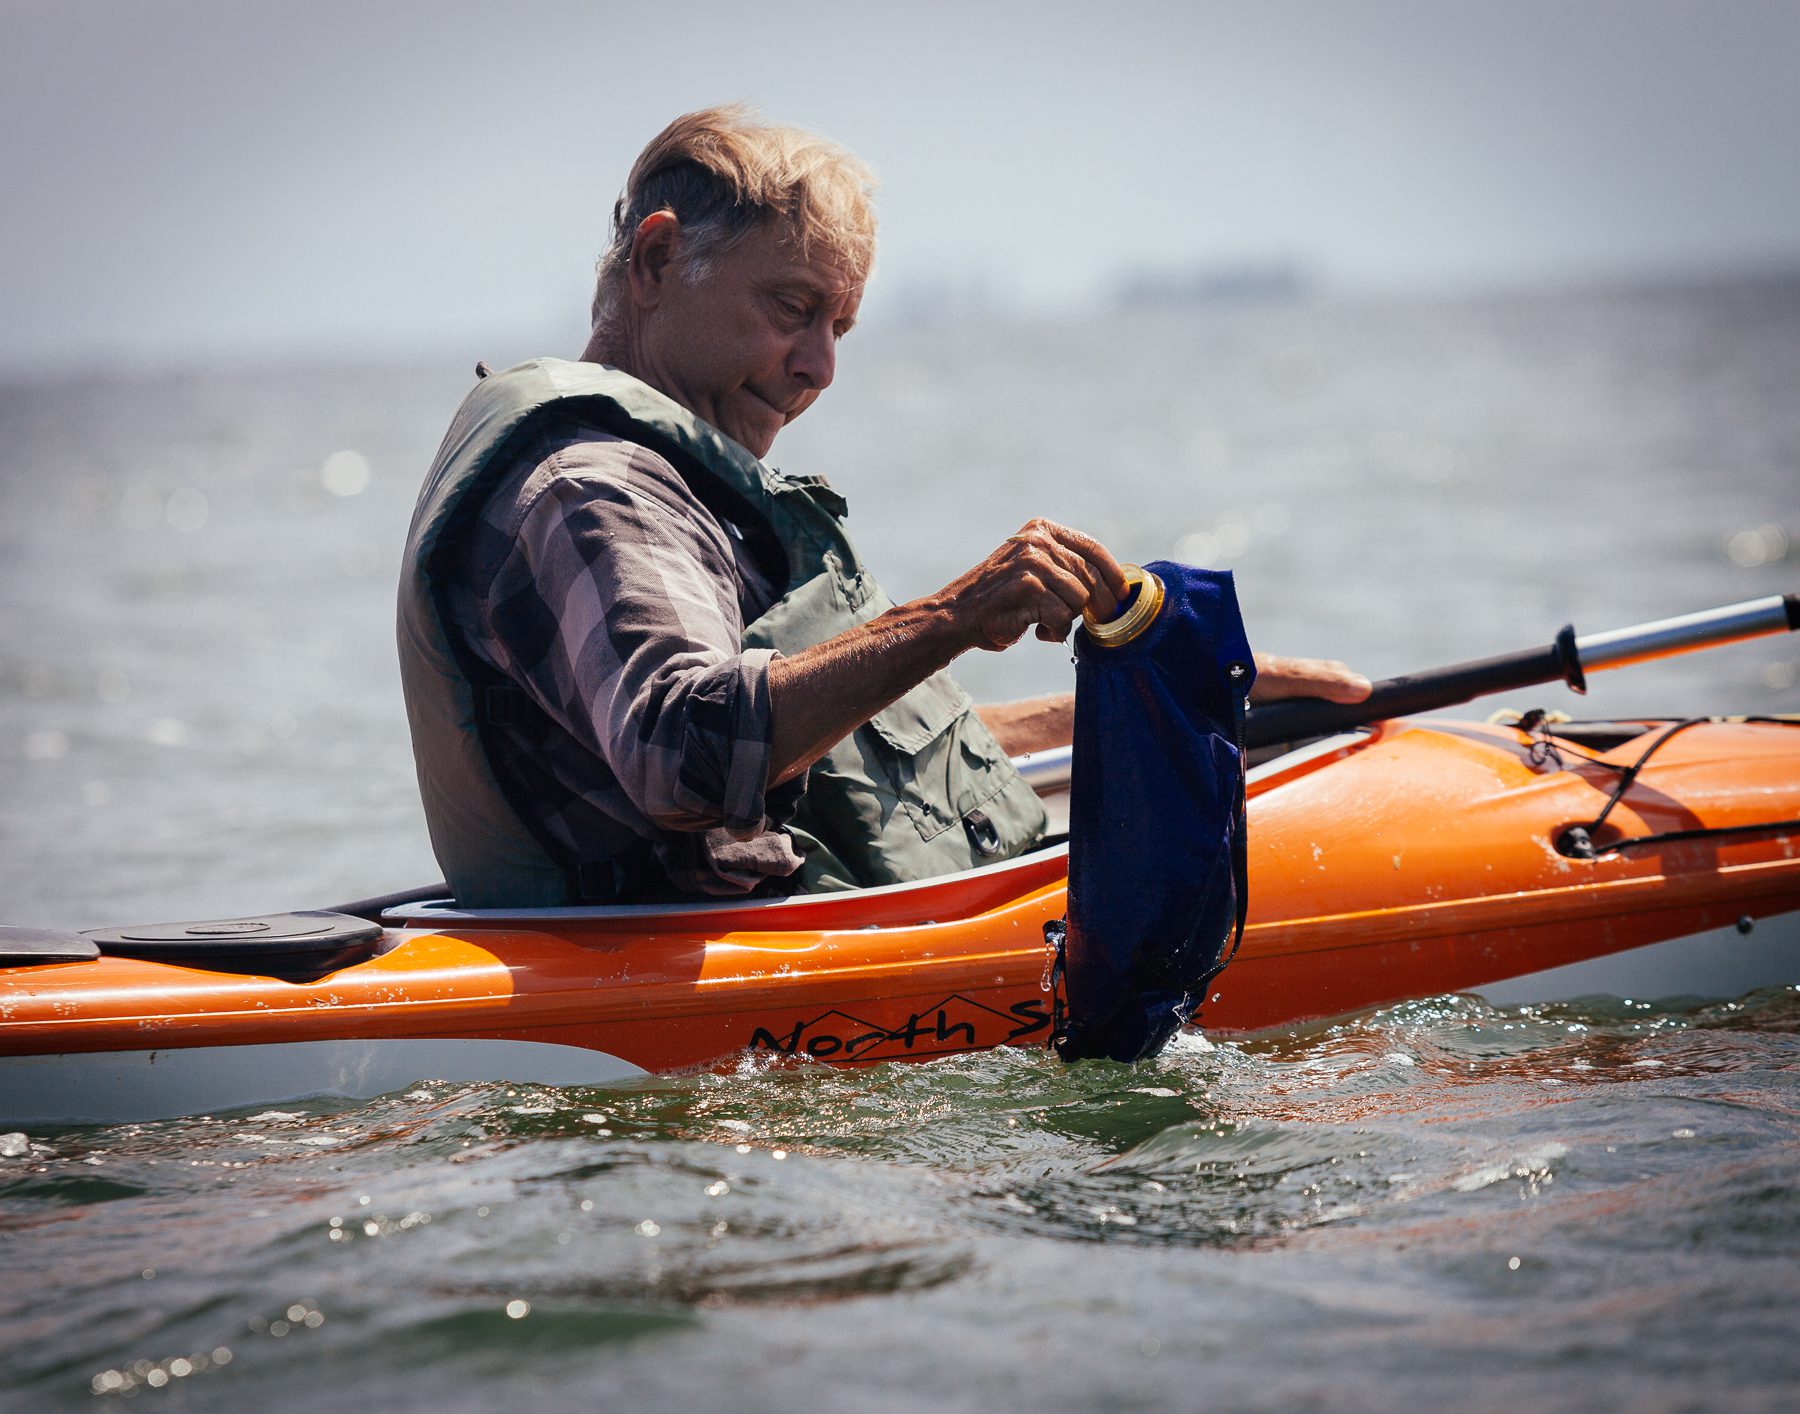 When he goes kayak camping out on the lake, Ken still drinks the water. He makes sure to get it out in the open water, never from the shore, and boil it. He knows how to spot and avoid microcystins  from toxic blue-green algae.